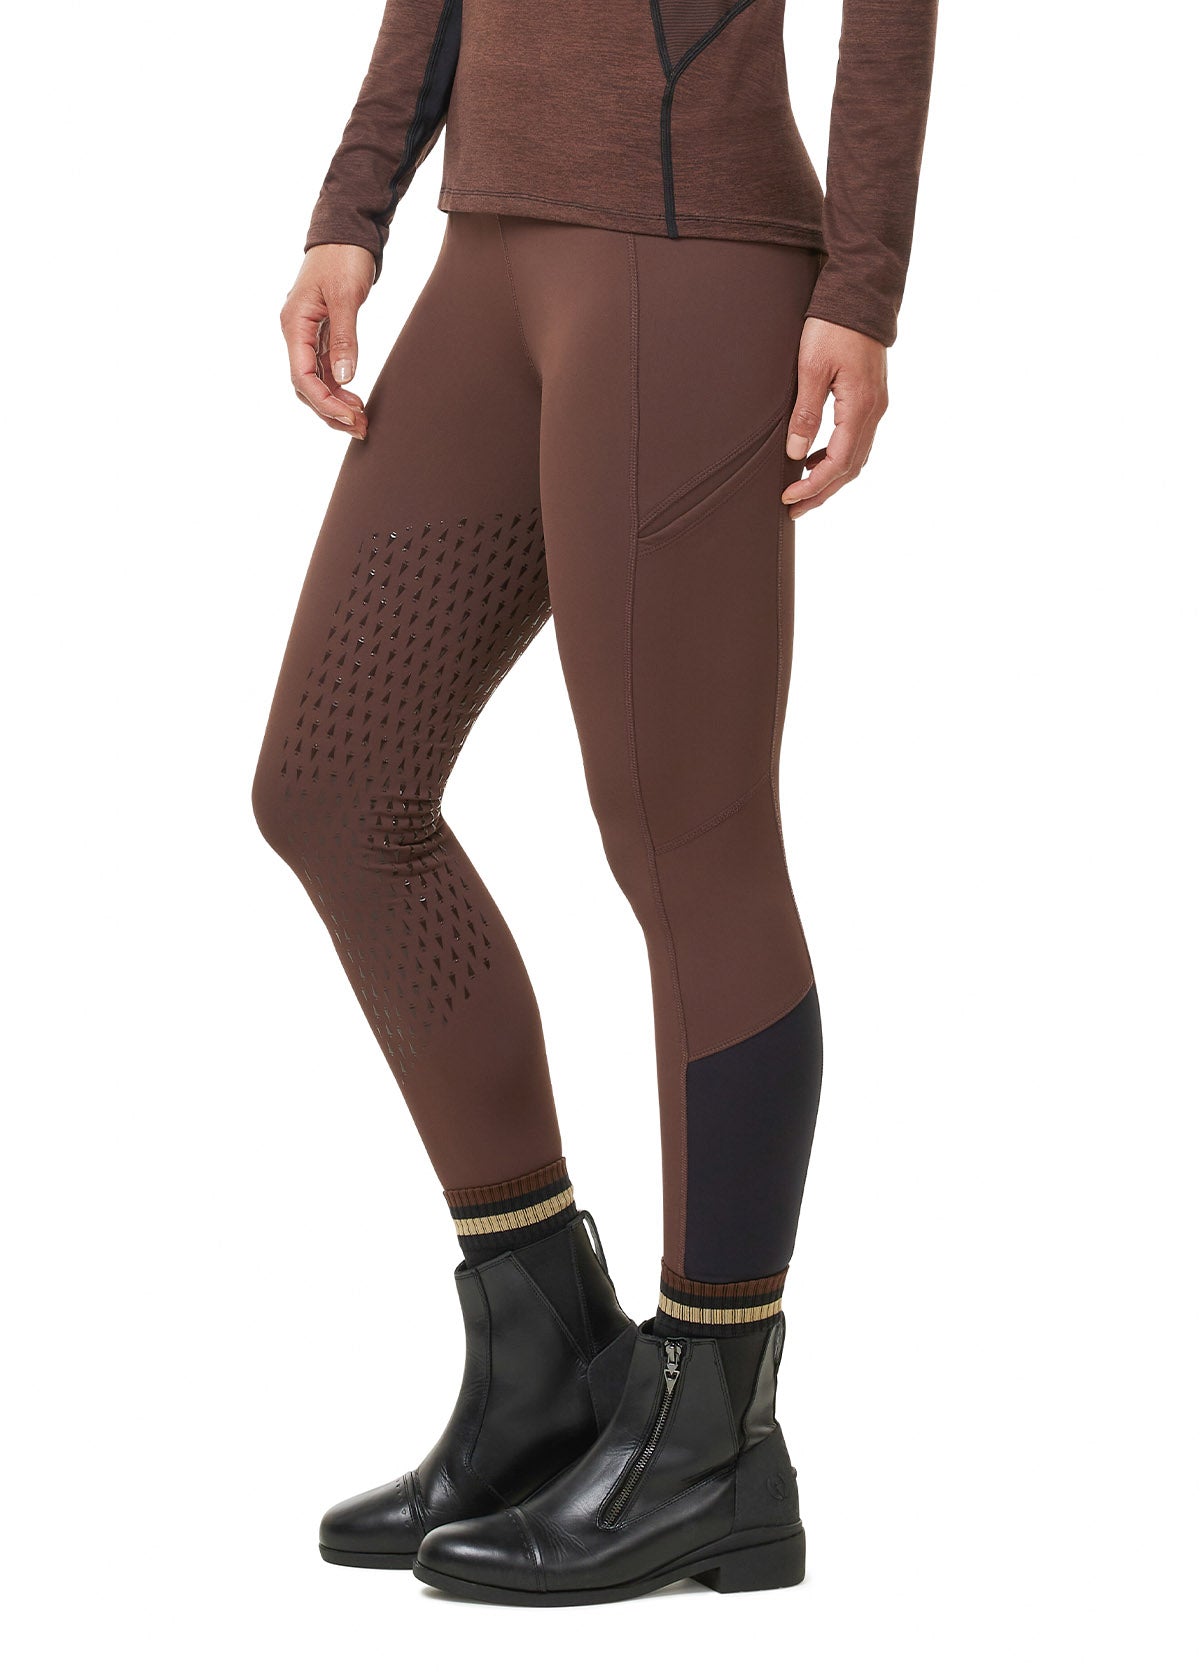 Kerrits Thermo 2.0 Tech Ladies' Full Leg Silicone Grip Riding Tights